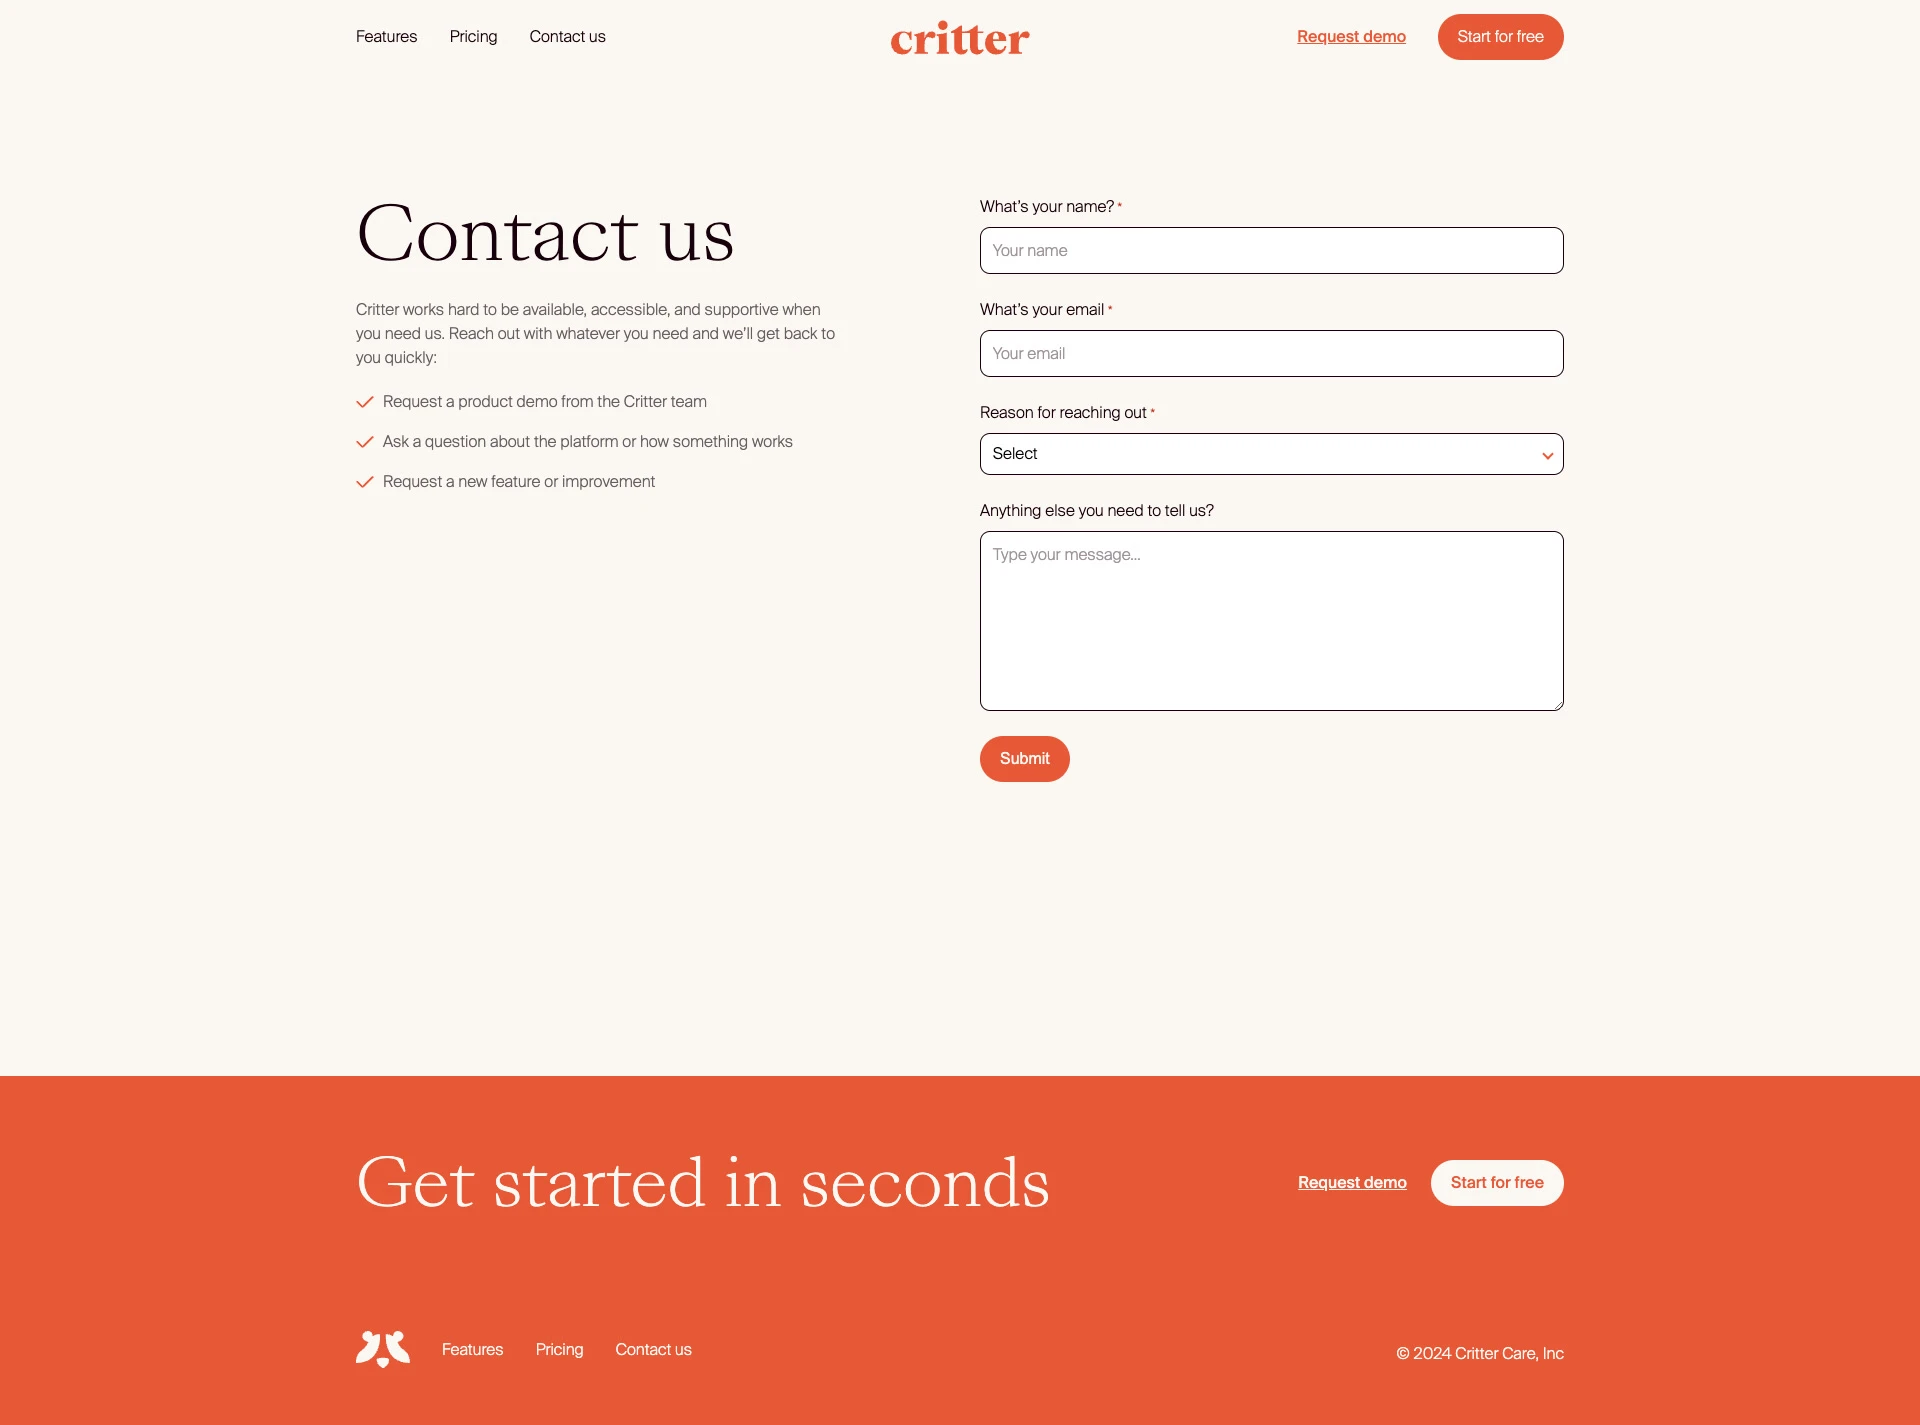 Critter Landing Page Example: The best mobile software for pet care businesses on the go, with tools for scheduling, invoicing, customer management, and communication.